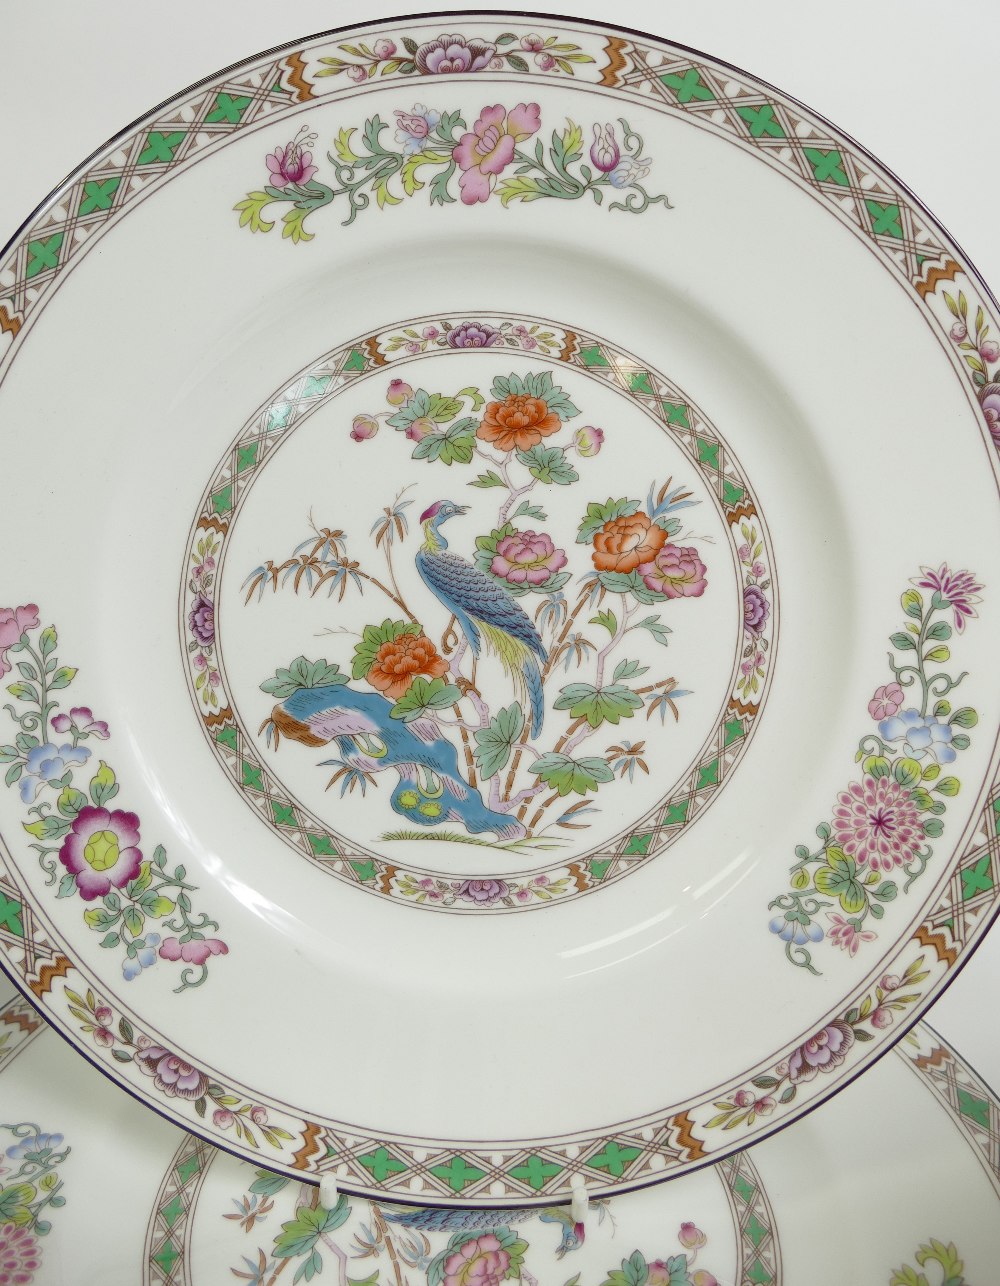 A large Wedgwood Dinner Service to include: Tea set, coffee cans and saucers, 25cm fruit bowl, - Image 5 of 6